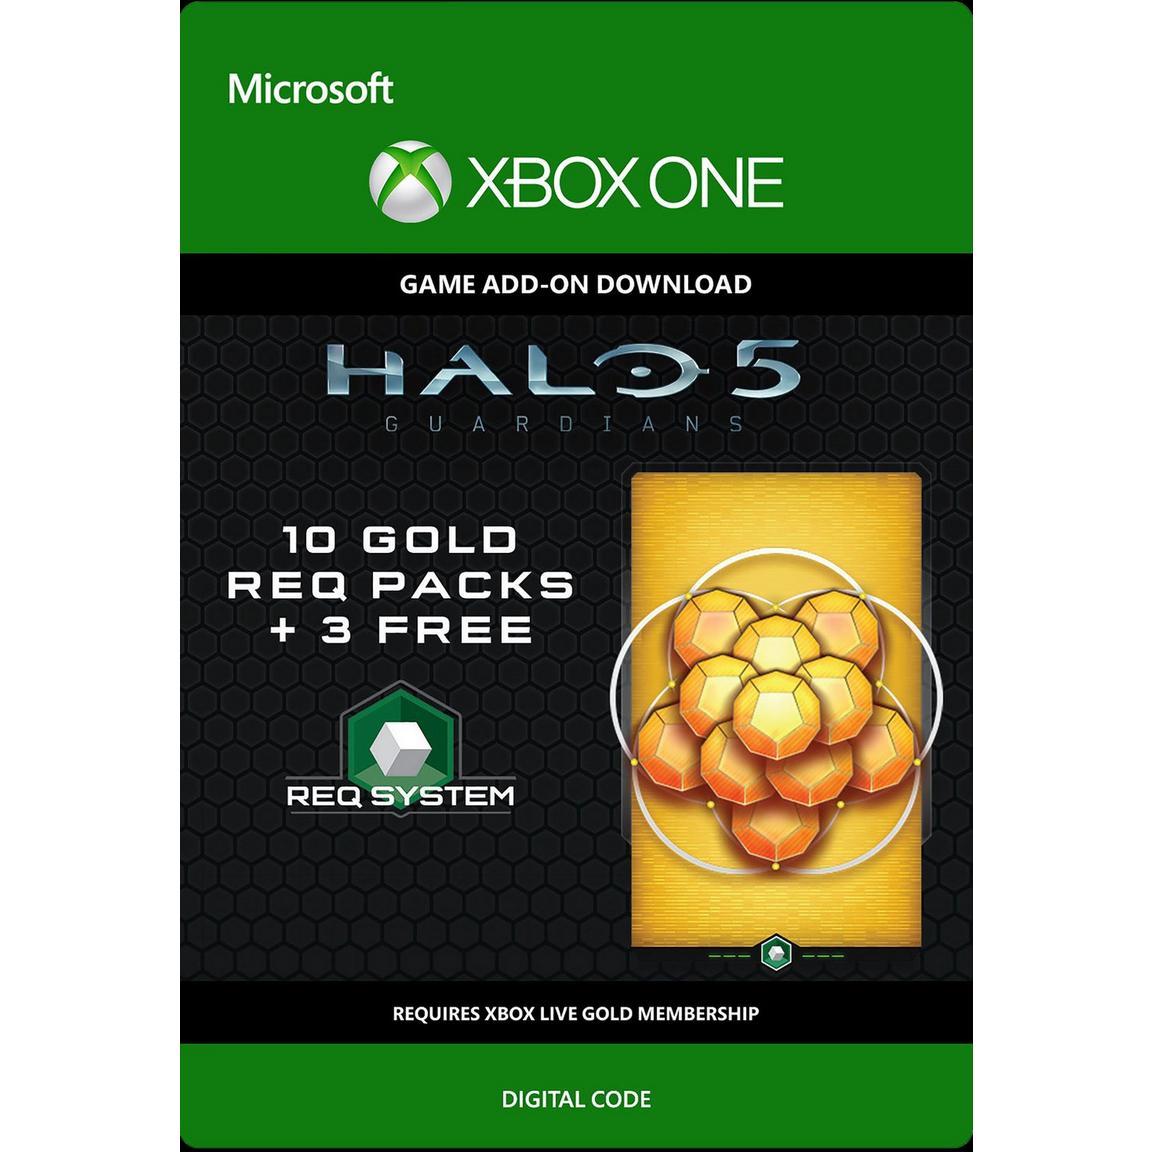 Microsoft Halo 5: Guardians 10 Gold Req Packs DLC and 3 Free - Xbox One -  7LM-00004